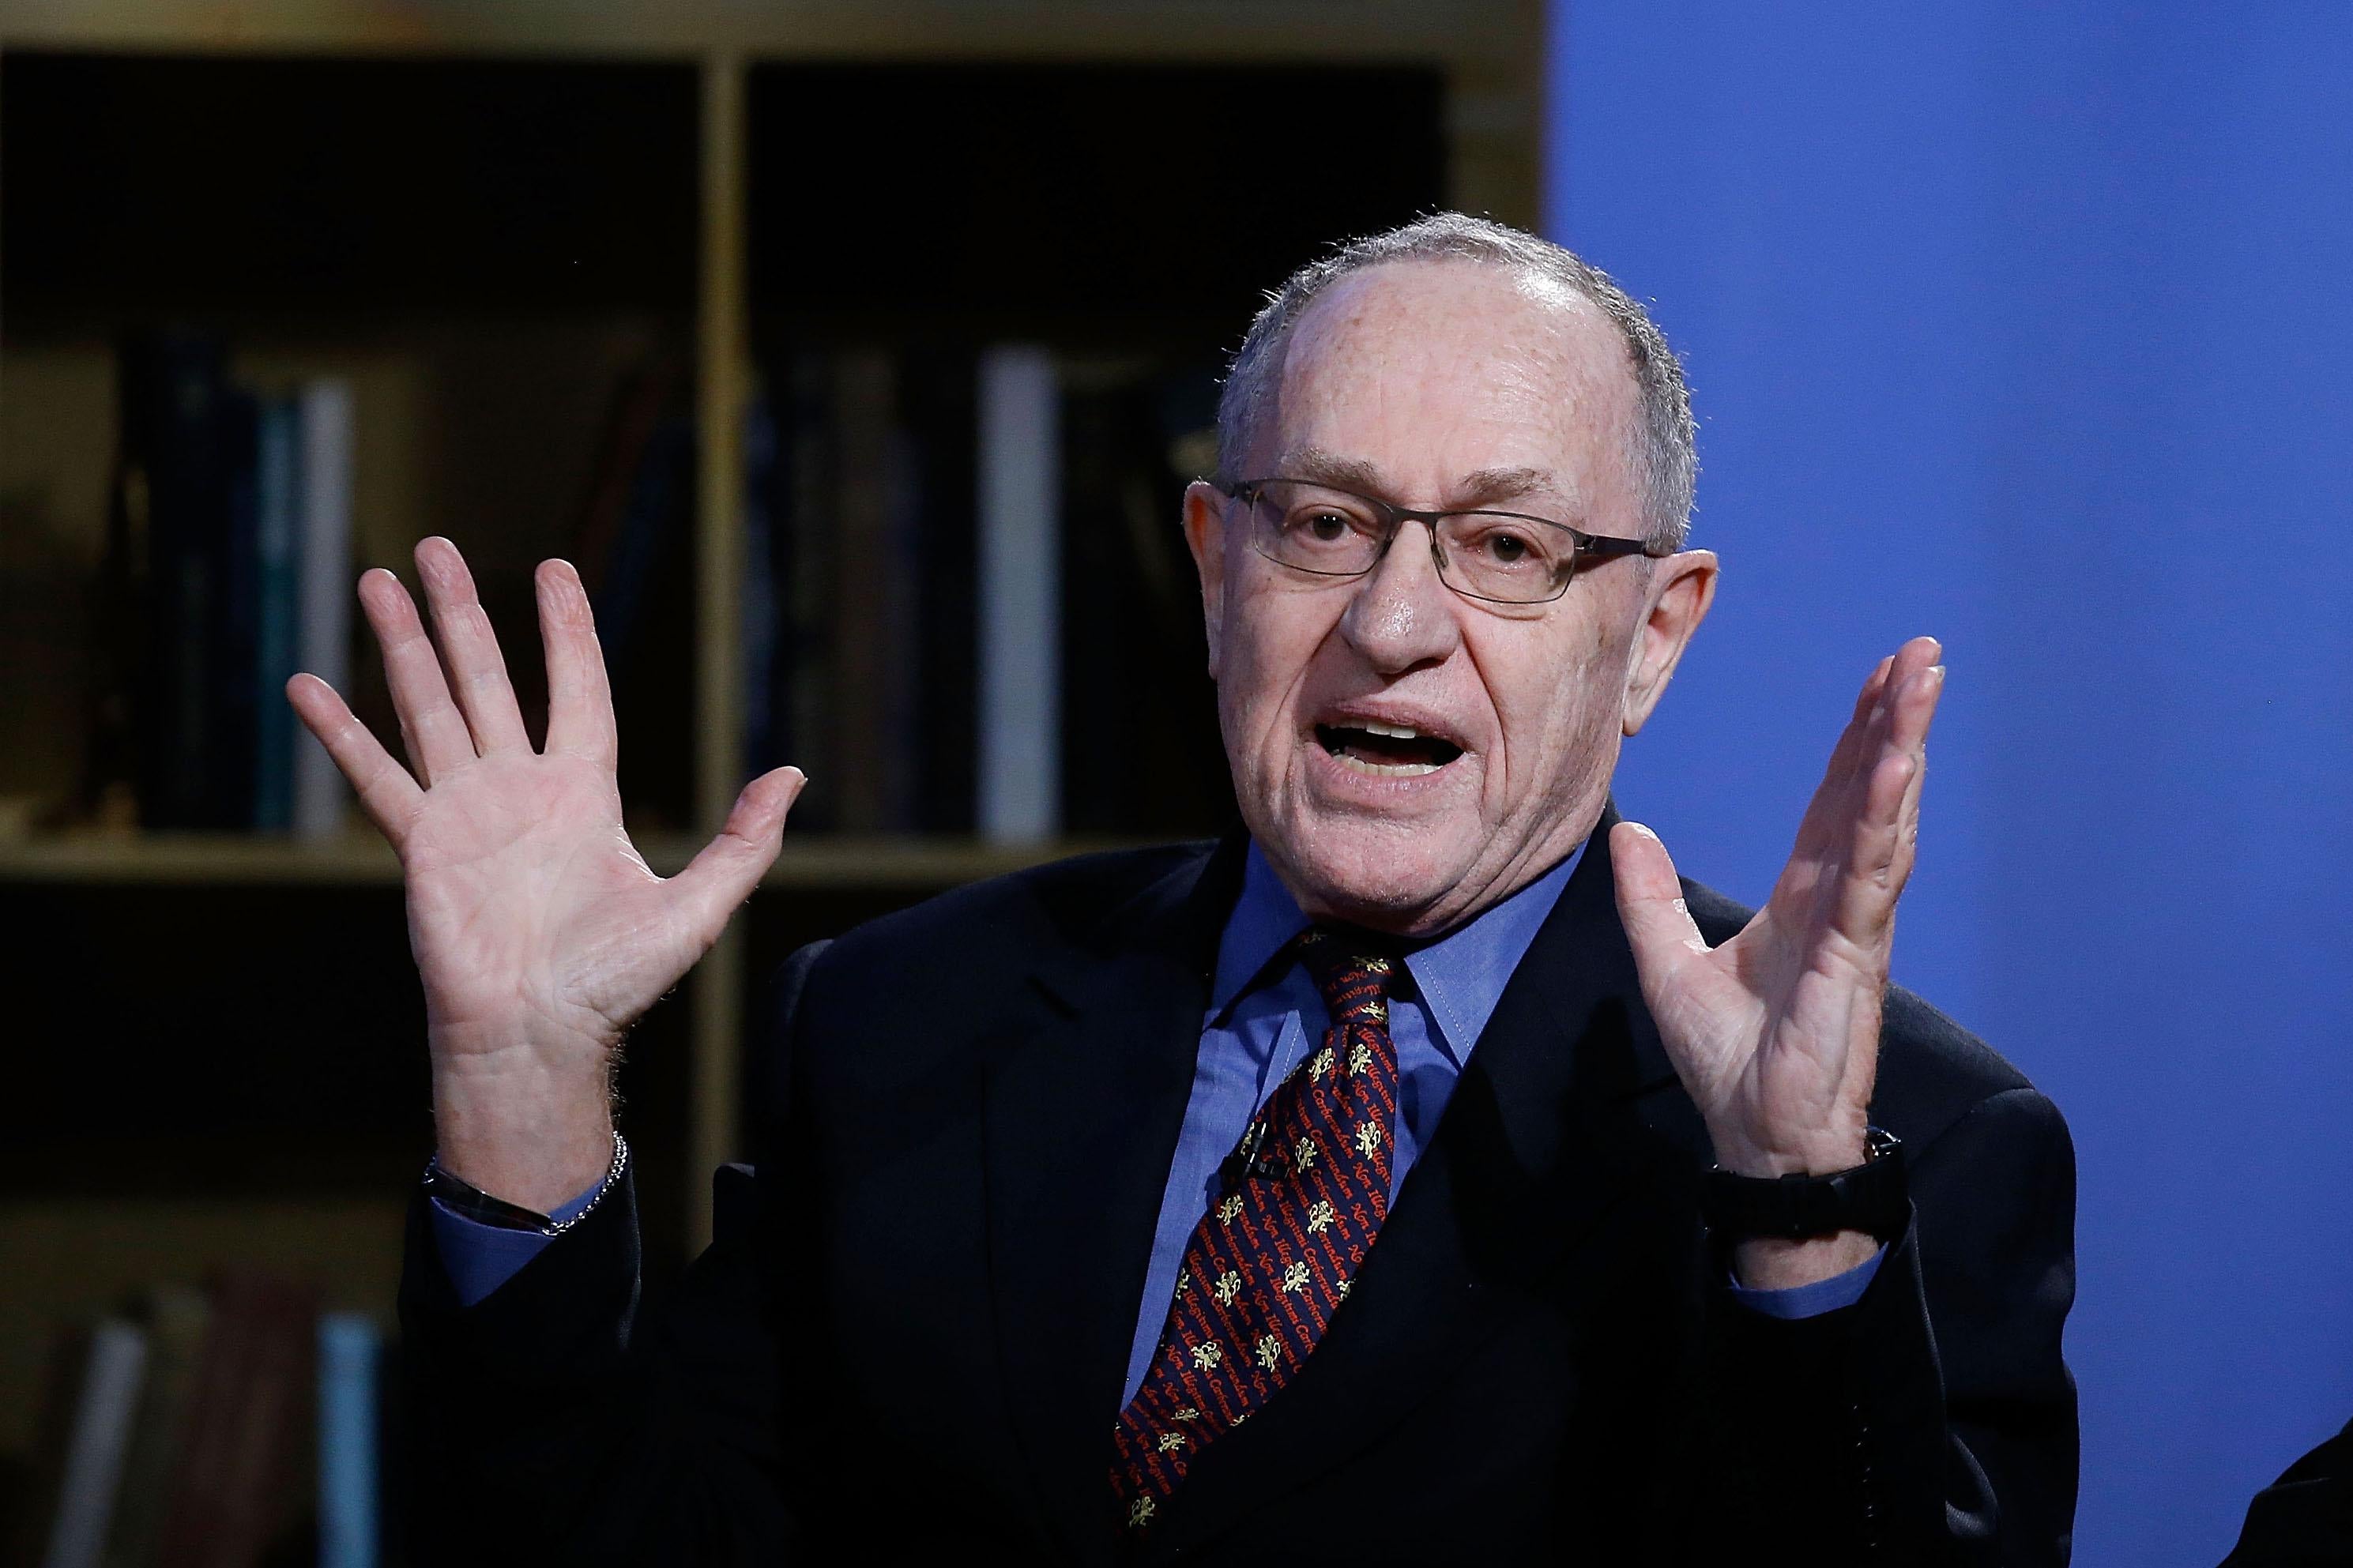 NEW YORK, NY - FEBRUARY 03:  Alan Dershowitz attends Hulu Presents 'Triumph's Election Special' produced by Funny Or Die at NEP Studios on February 3, 2016 in New York City.  (Photo by John Lamparski/Getty Images for Hulu)